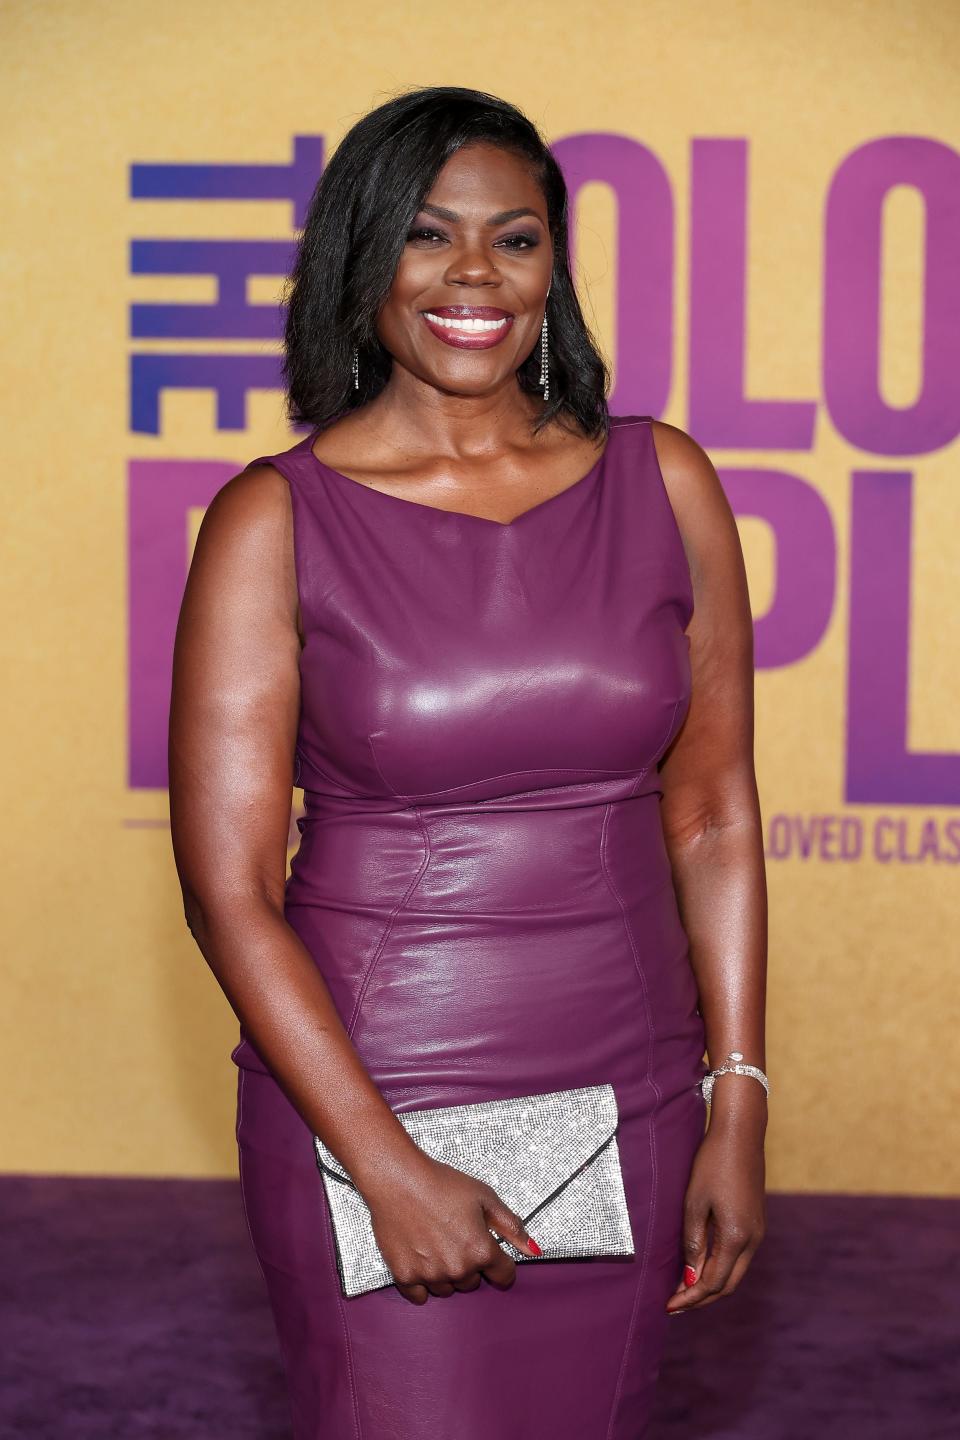 LOS ANGELES, CALIFORNIA - DECEMBER 06: Tiffany Elle Burgess attends the World Premiere of Warner Bros.' "The Color Purple" at Academy Museum of Motion Pictures on December 06, 2023 in Los Angeles, California. (Photo by Leon Bennett/Getty Images)